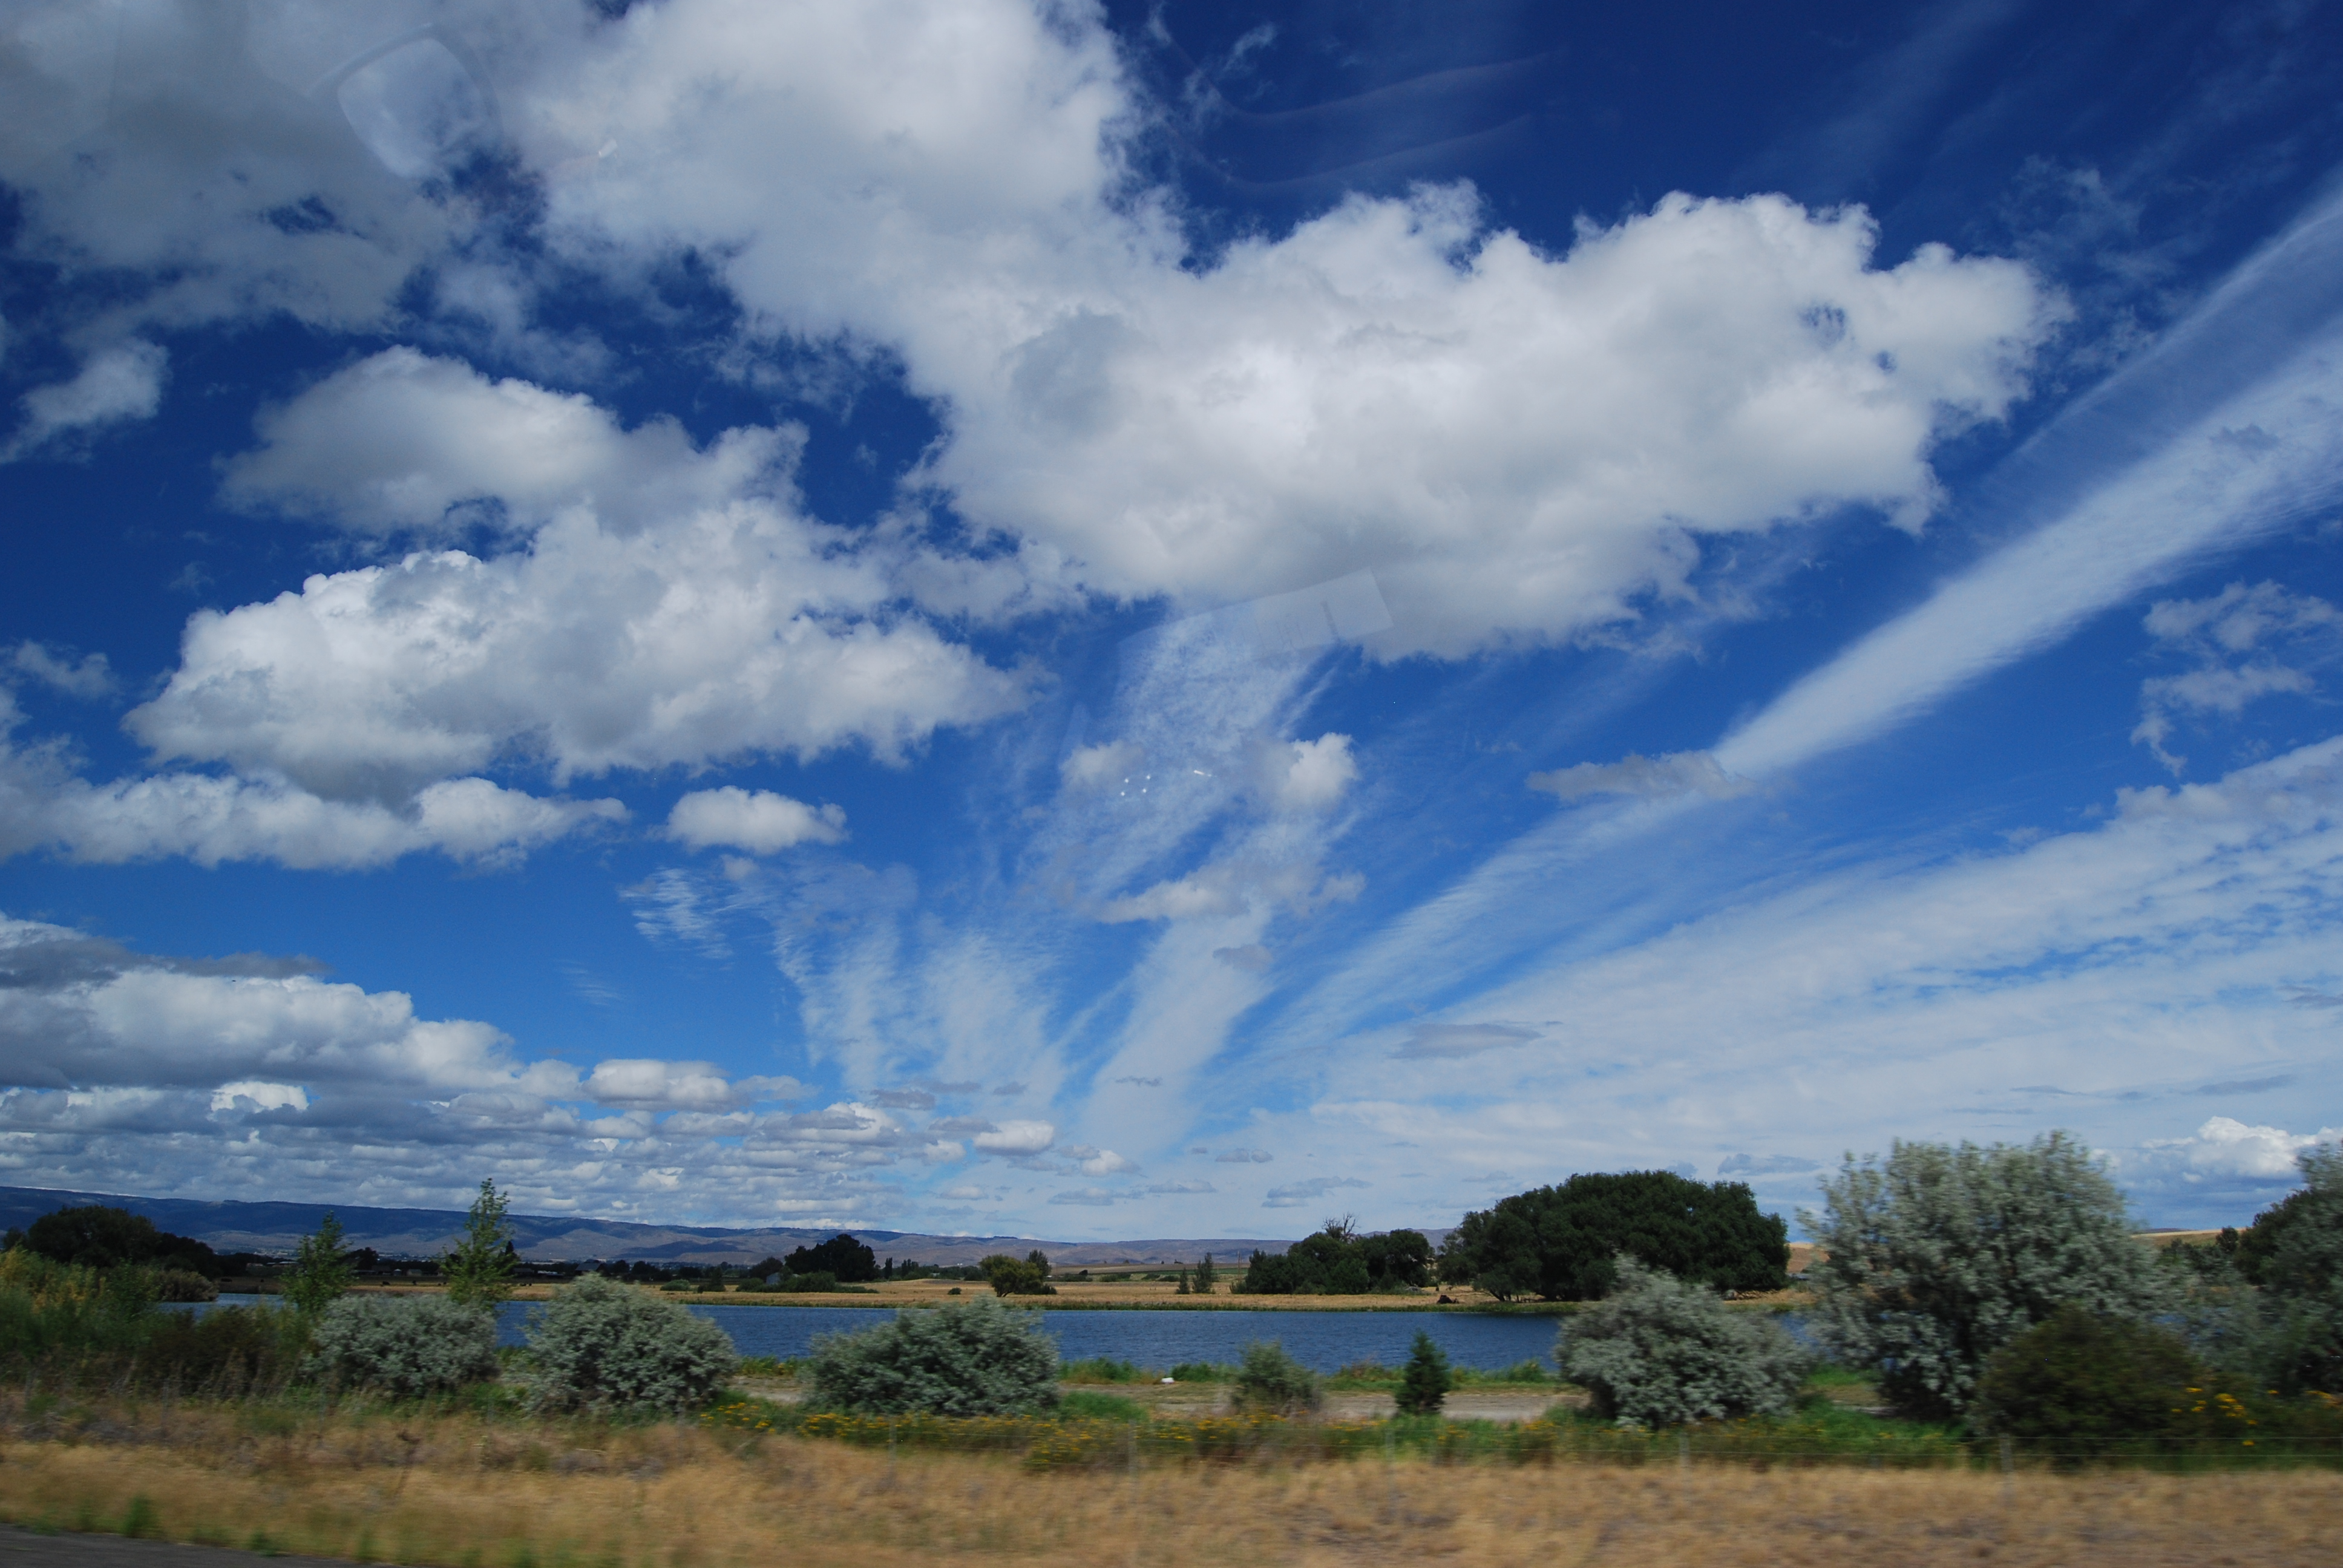 Lower altitude fluffy clouds compoused of water microdroplets and higher alttitude thin elongated clouds fill the sky over the Columbia River in Richland, Washington. Laskin investigates the composition and phyisical properties of the individual atmospheric particles that control processes of cloud formation and persistence. Photo is courtesy of Laskin. 